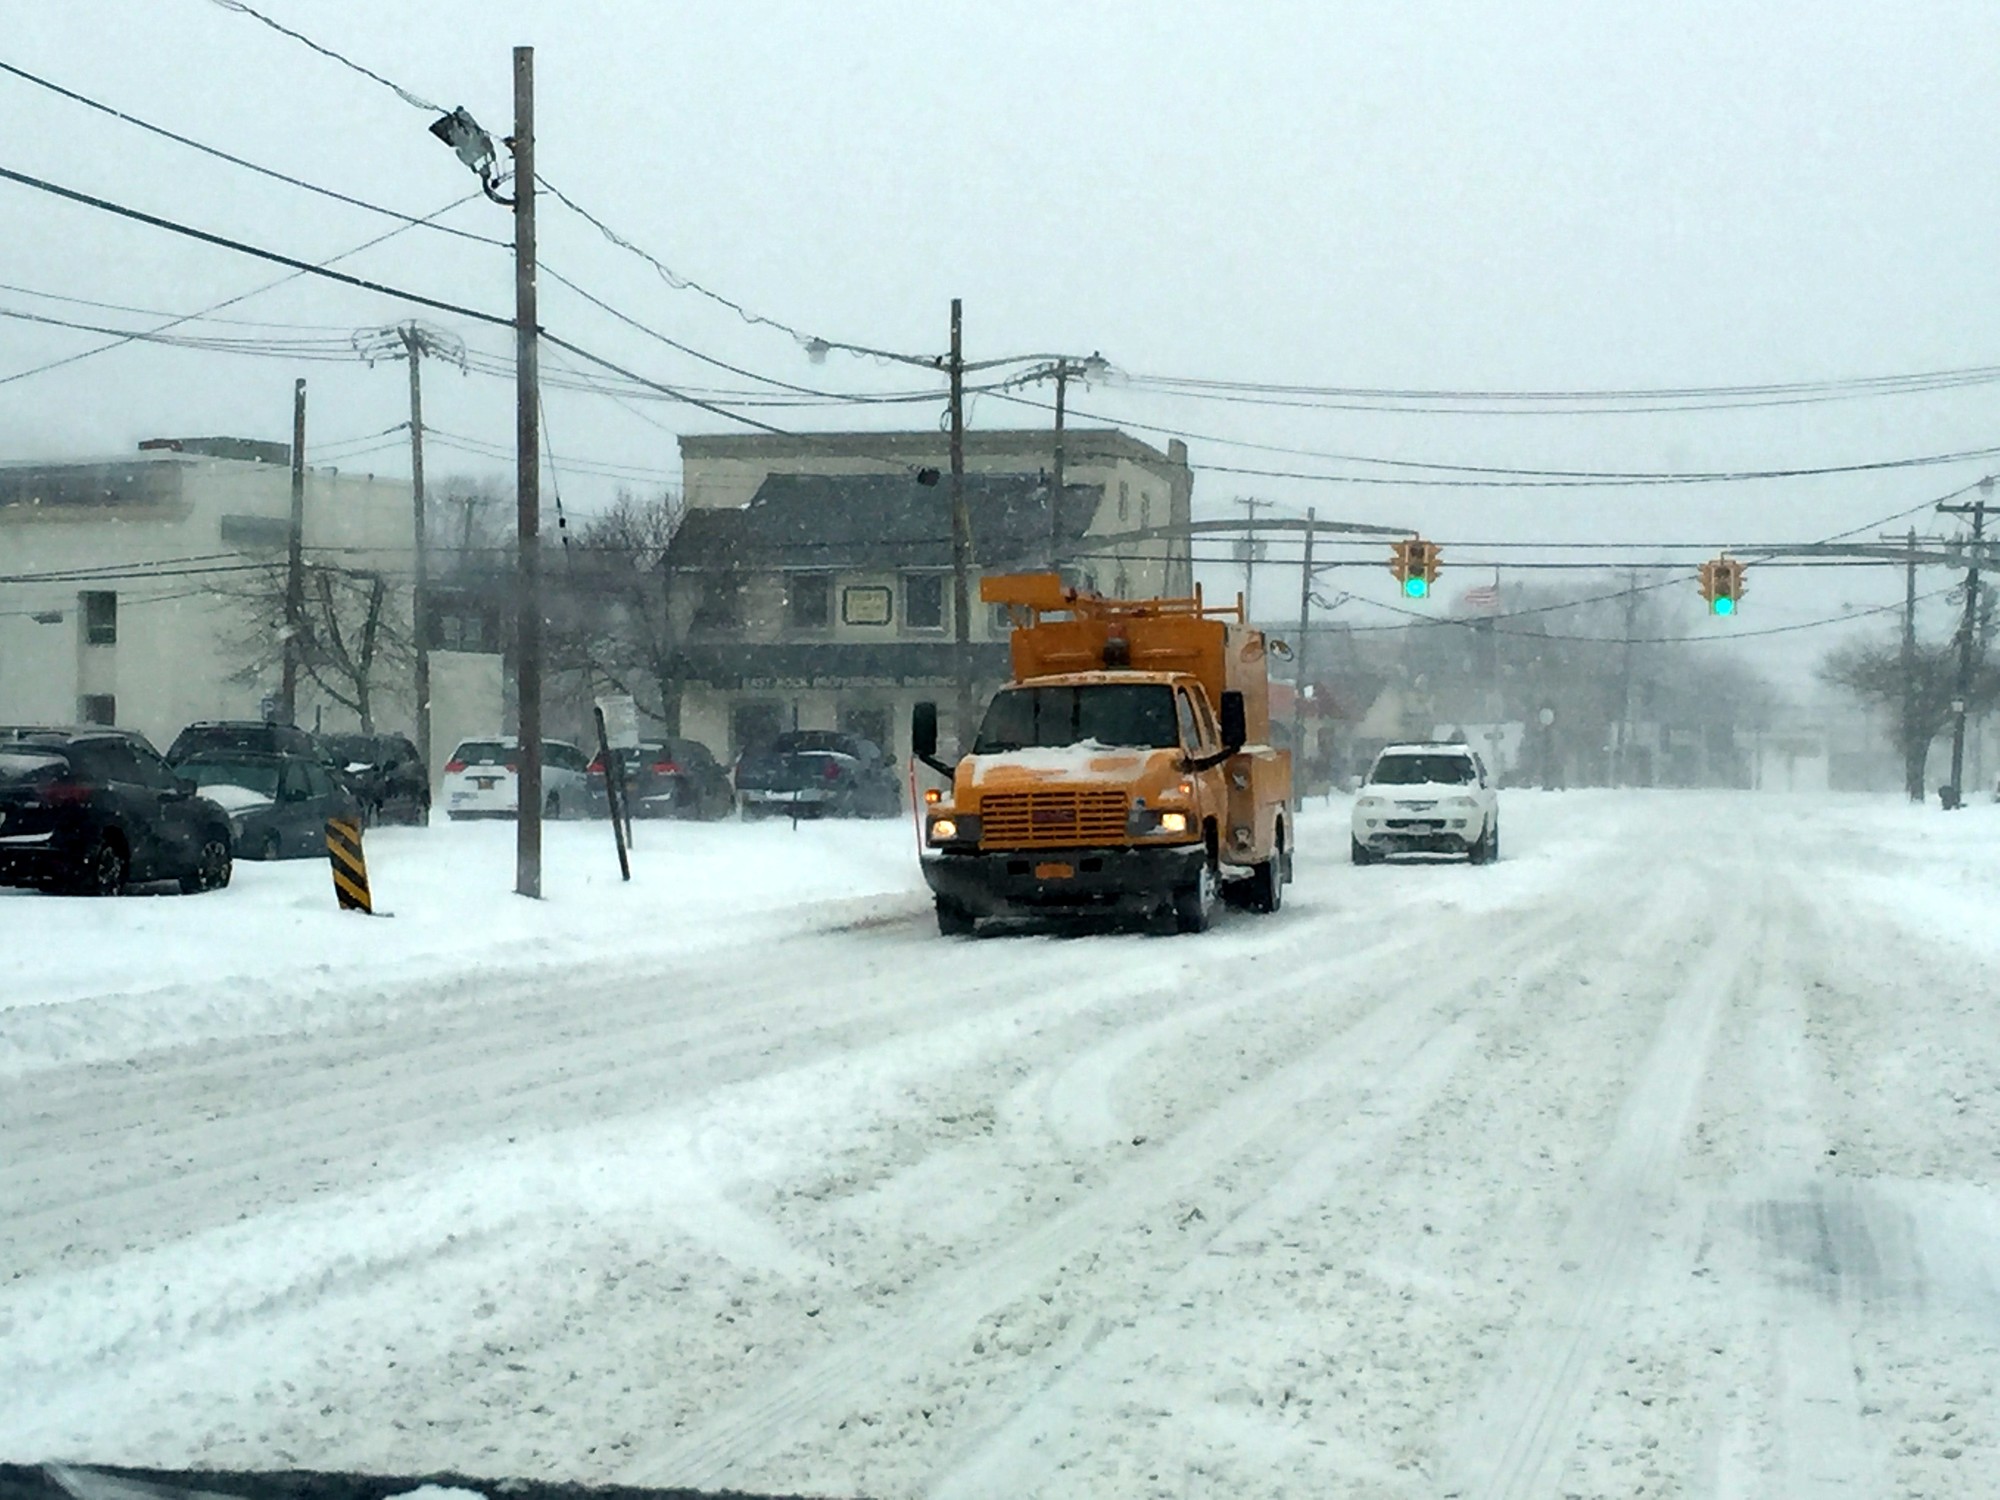 Utilities trucks and snow plows are out at the height of the storm.